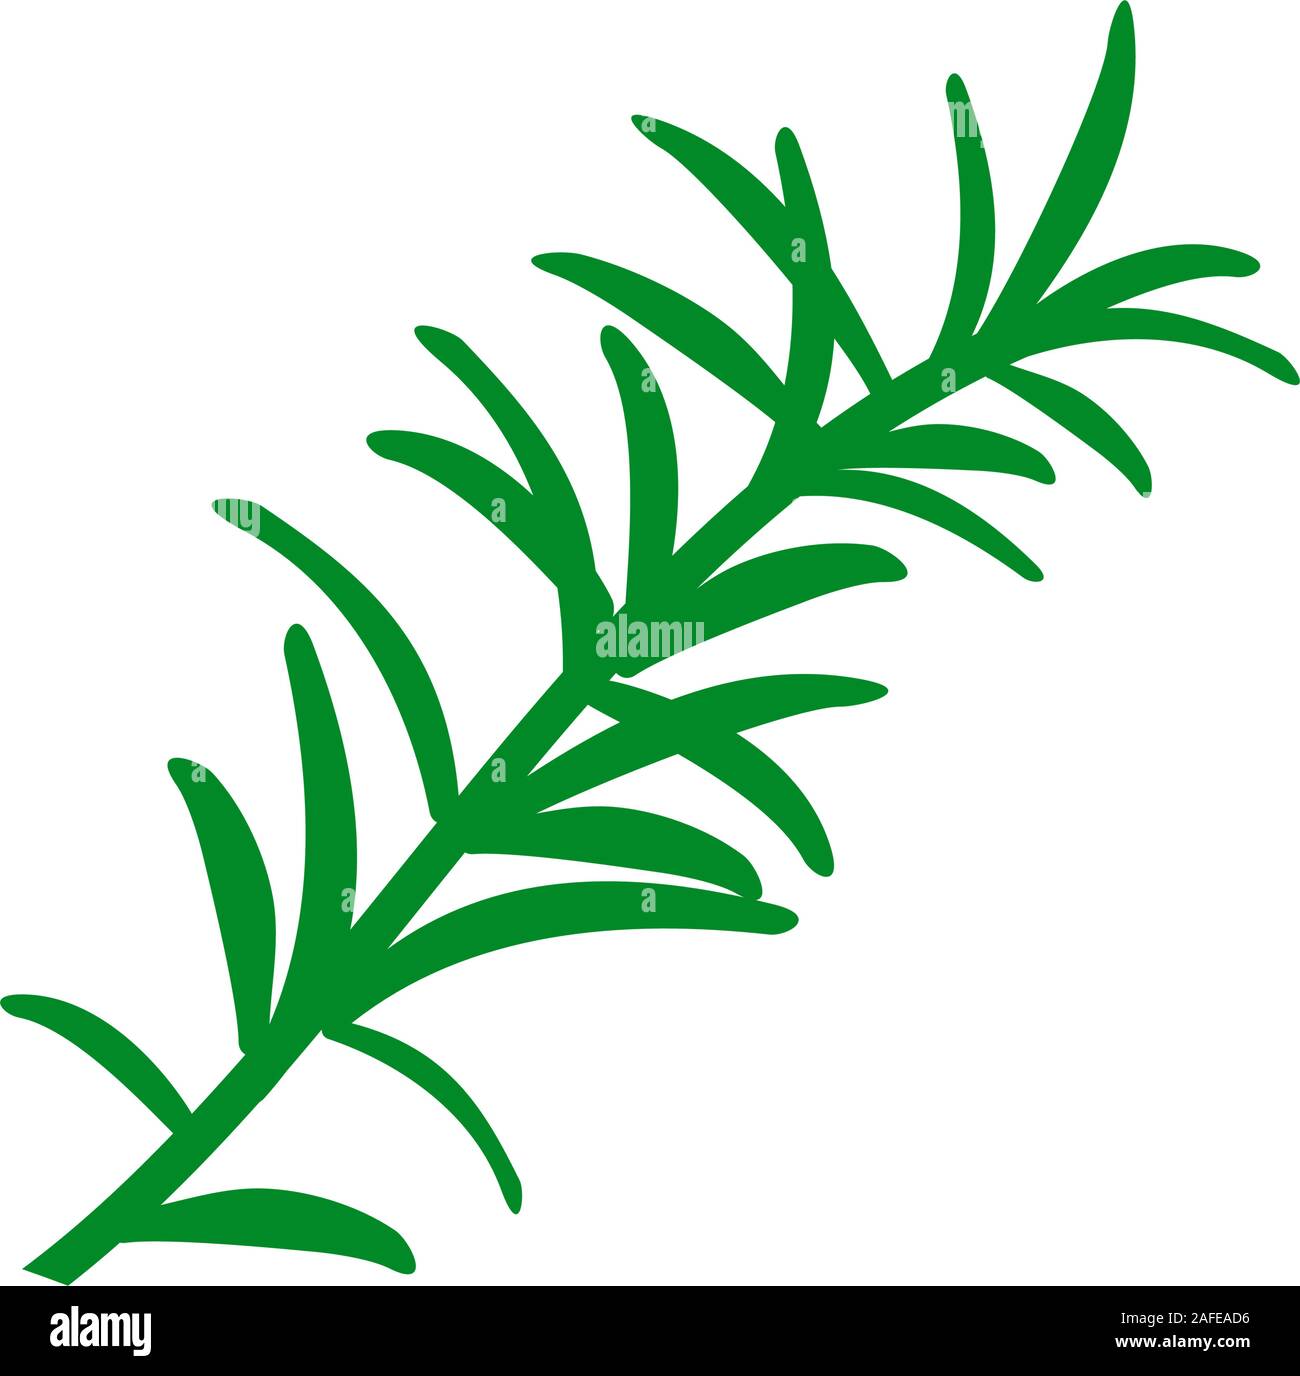 Rosemary branch. Isolated on white background. Hand drawn vector illustration. Retro style. Stock Vector